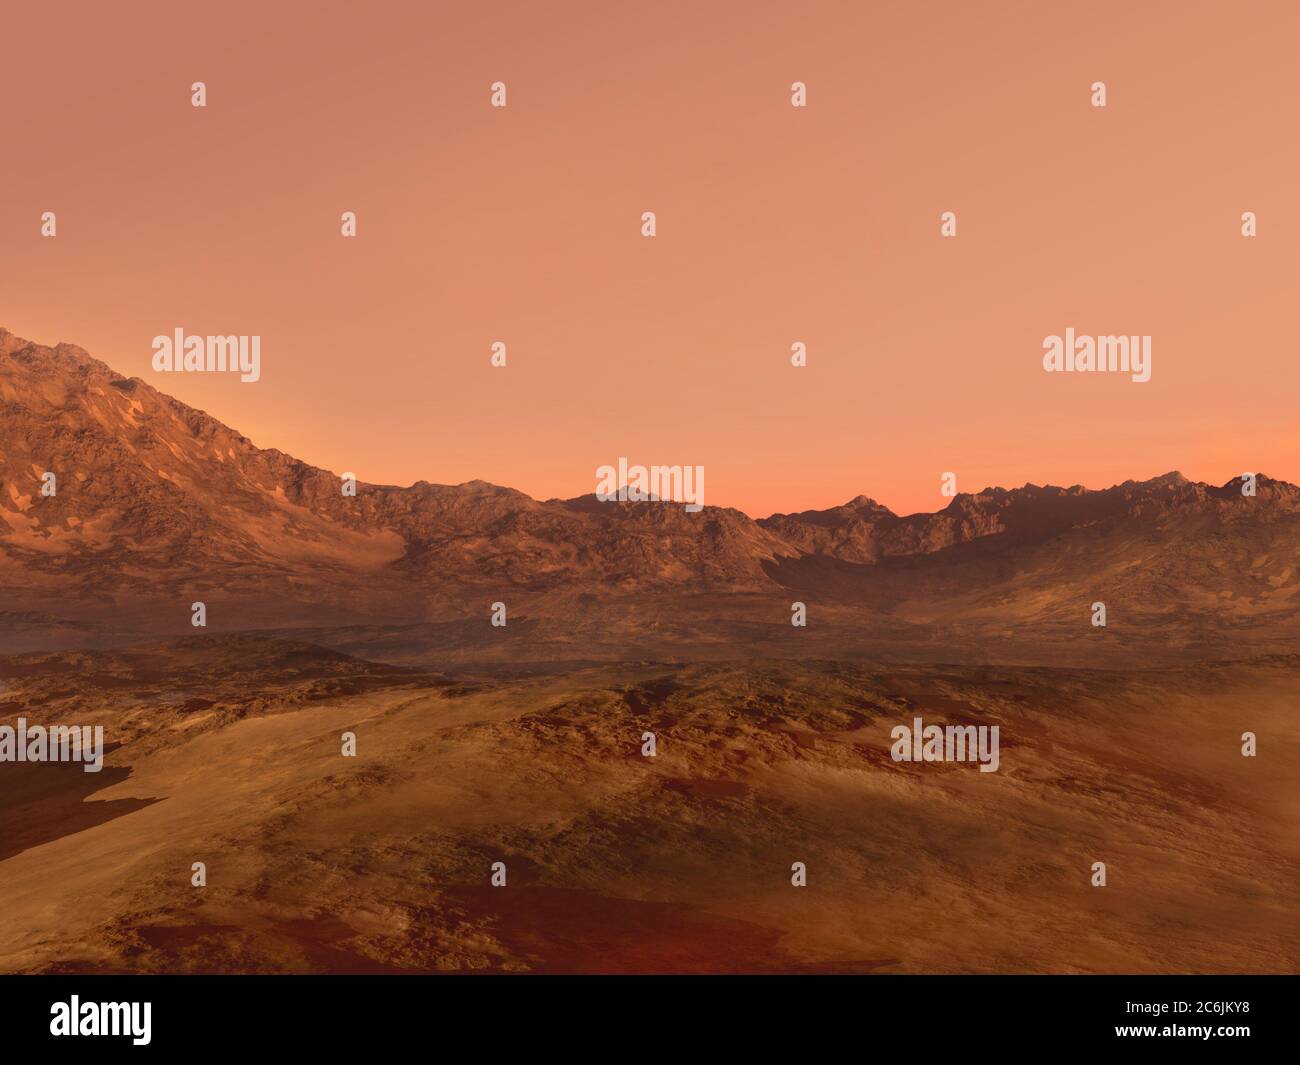 3D Mars landscape rendering with a red rocky terrain, for science fiction or space exploration backgrounds. Stock Photo